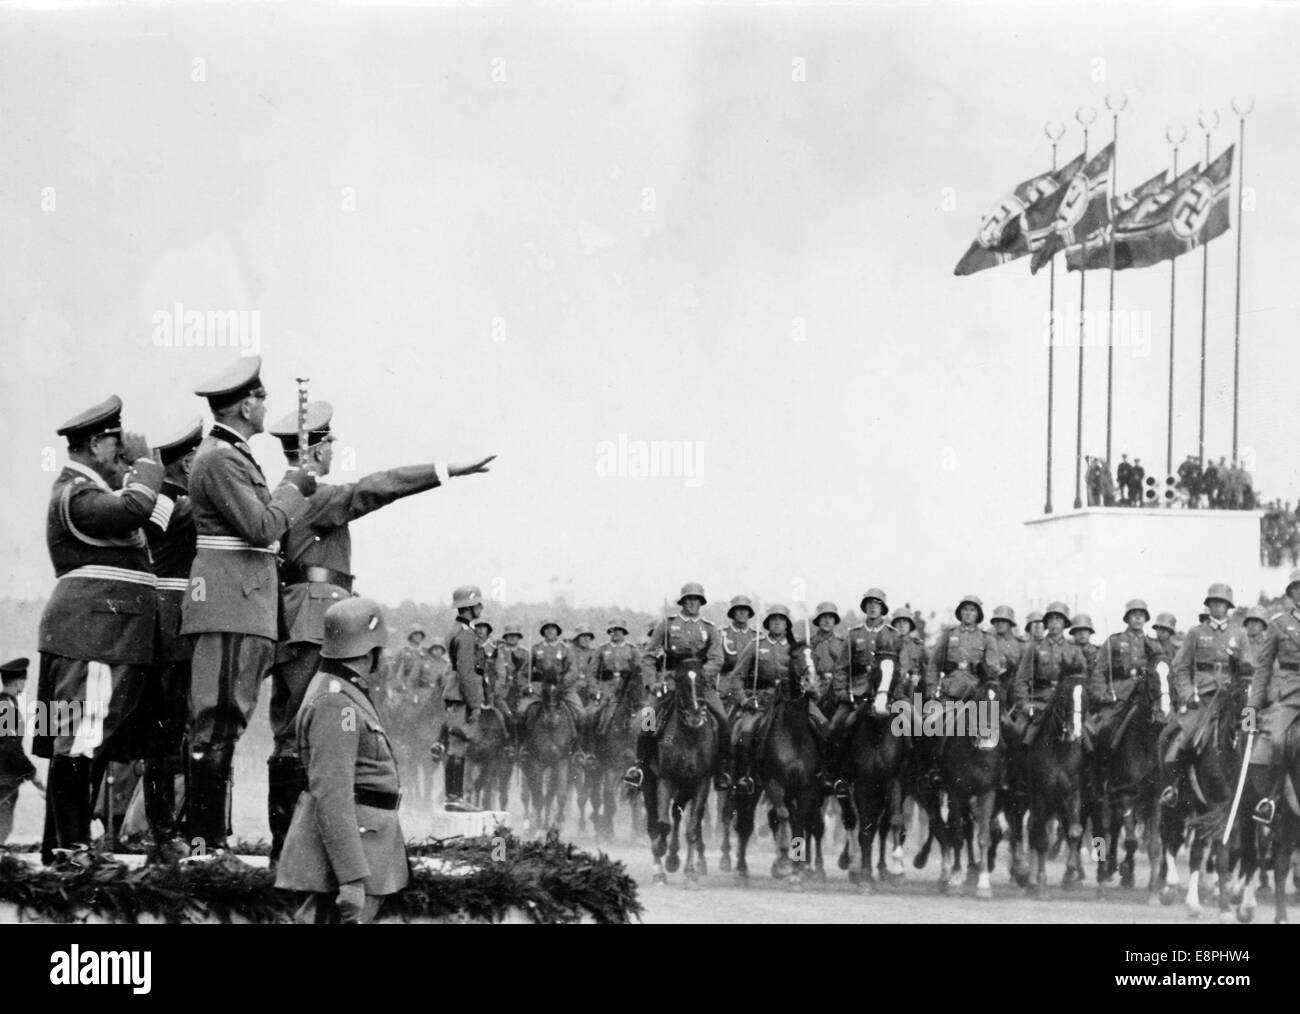 Nuremberg Rally 1937 in Nuremberg, Germany - Nazi party rally grounds - Demonstration by the Nazi armed forces (Wehrmacht) on Zeppelin Field, here march-past of the cavalry in front of Adolf Hitler (right, on the podium), Minister of War Werner von Blomberg (second from right, on the podium) and Colonel General Hermann Goering (left, on the podium). (Flaws in quality due to the historic picture copy) Fotoarchiv für Zeitgeschichtee - NO WIRE SERVICE - Stock Photo